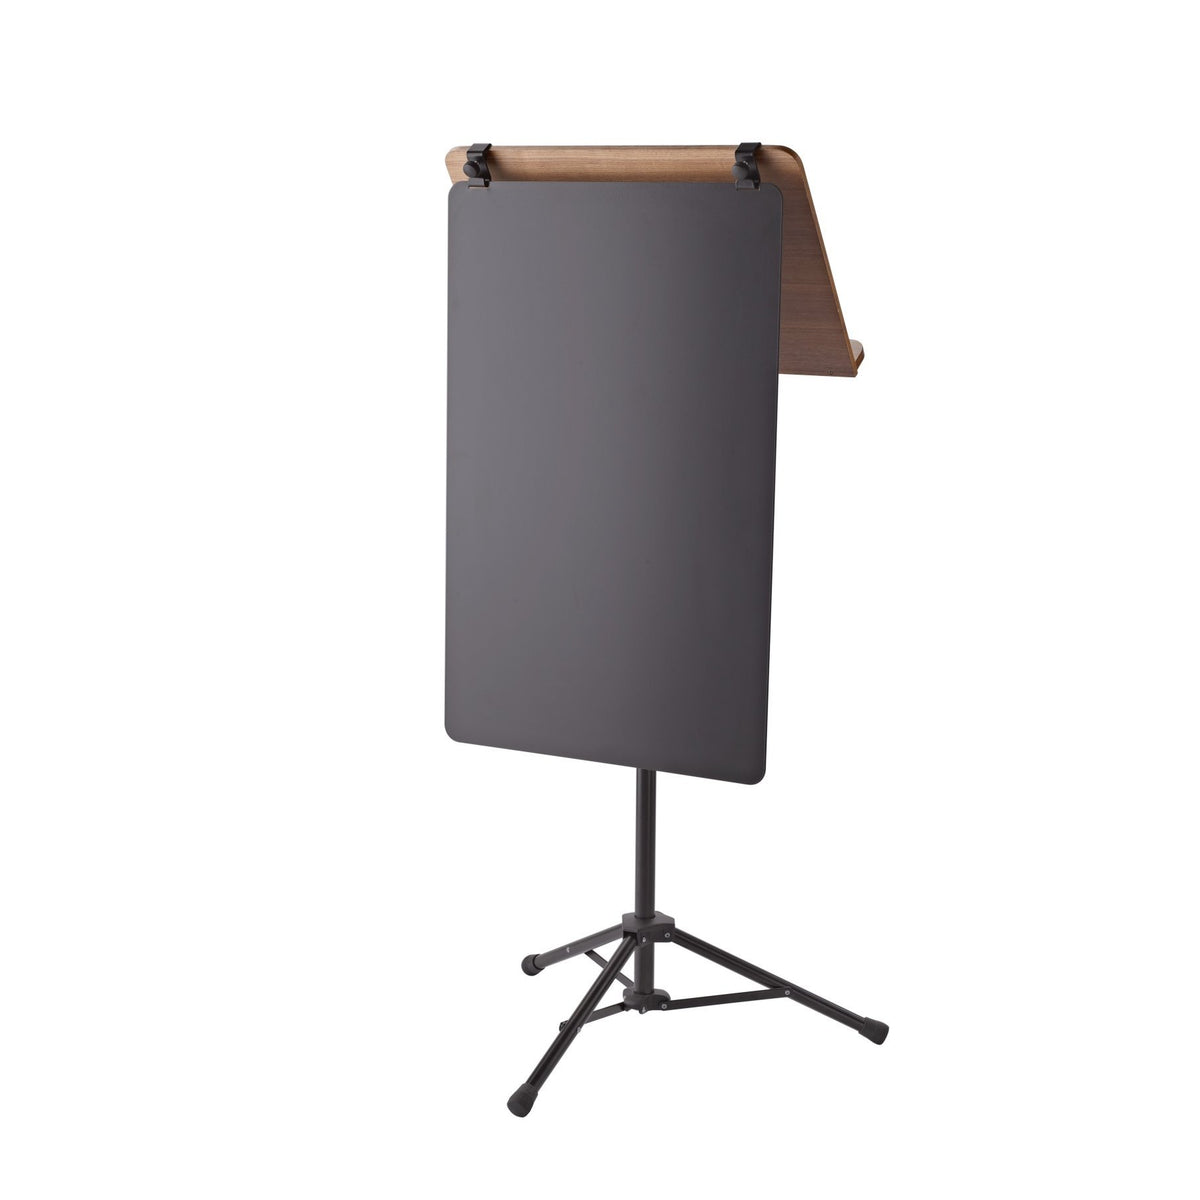 KÃ¶nig &amp; Meyer - 12384 Advertising Panel for Orchestra Music Desks (Attachable to Stands)-Music Stand-KÃ¶nig &amp; Meyer-Music Elements